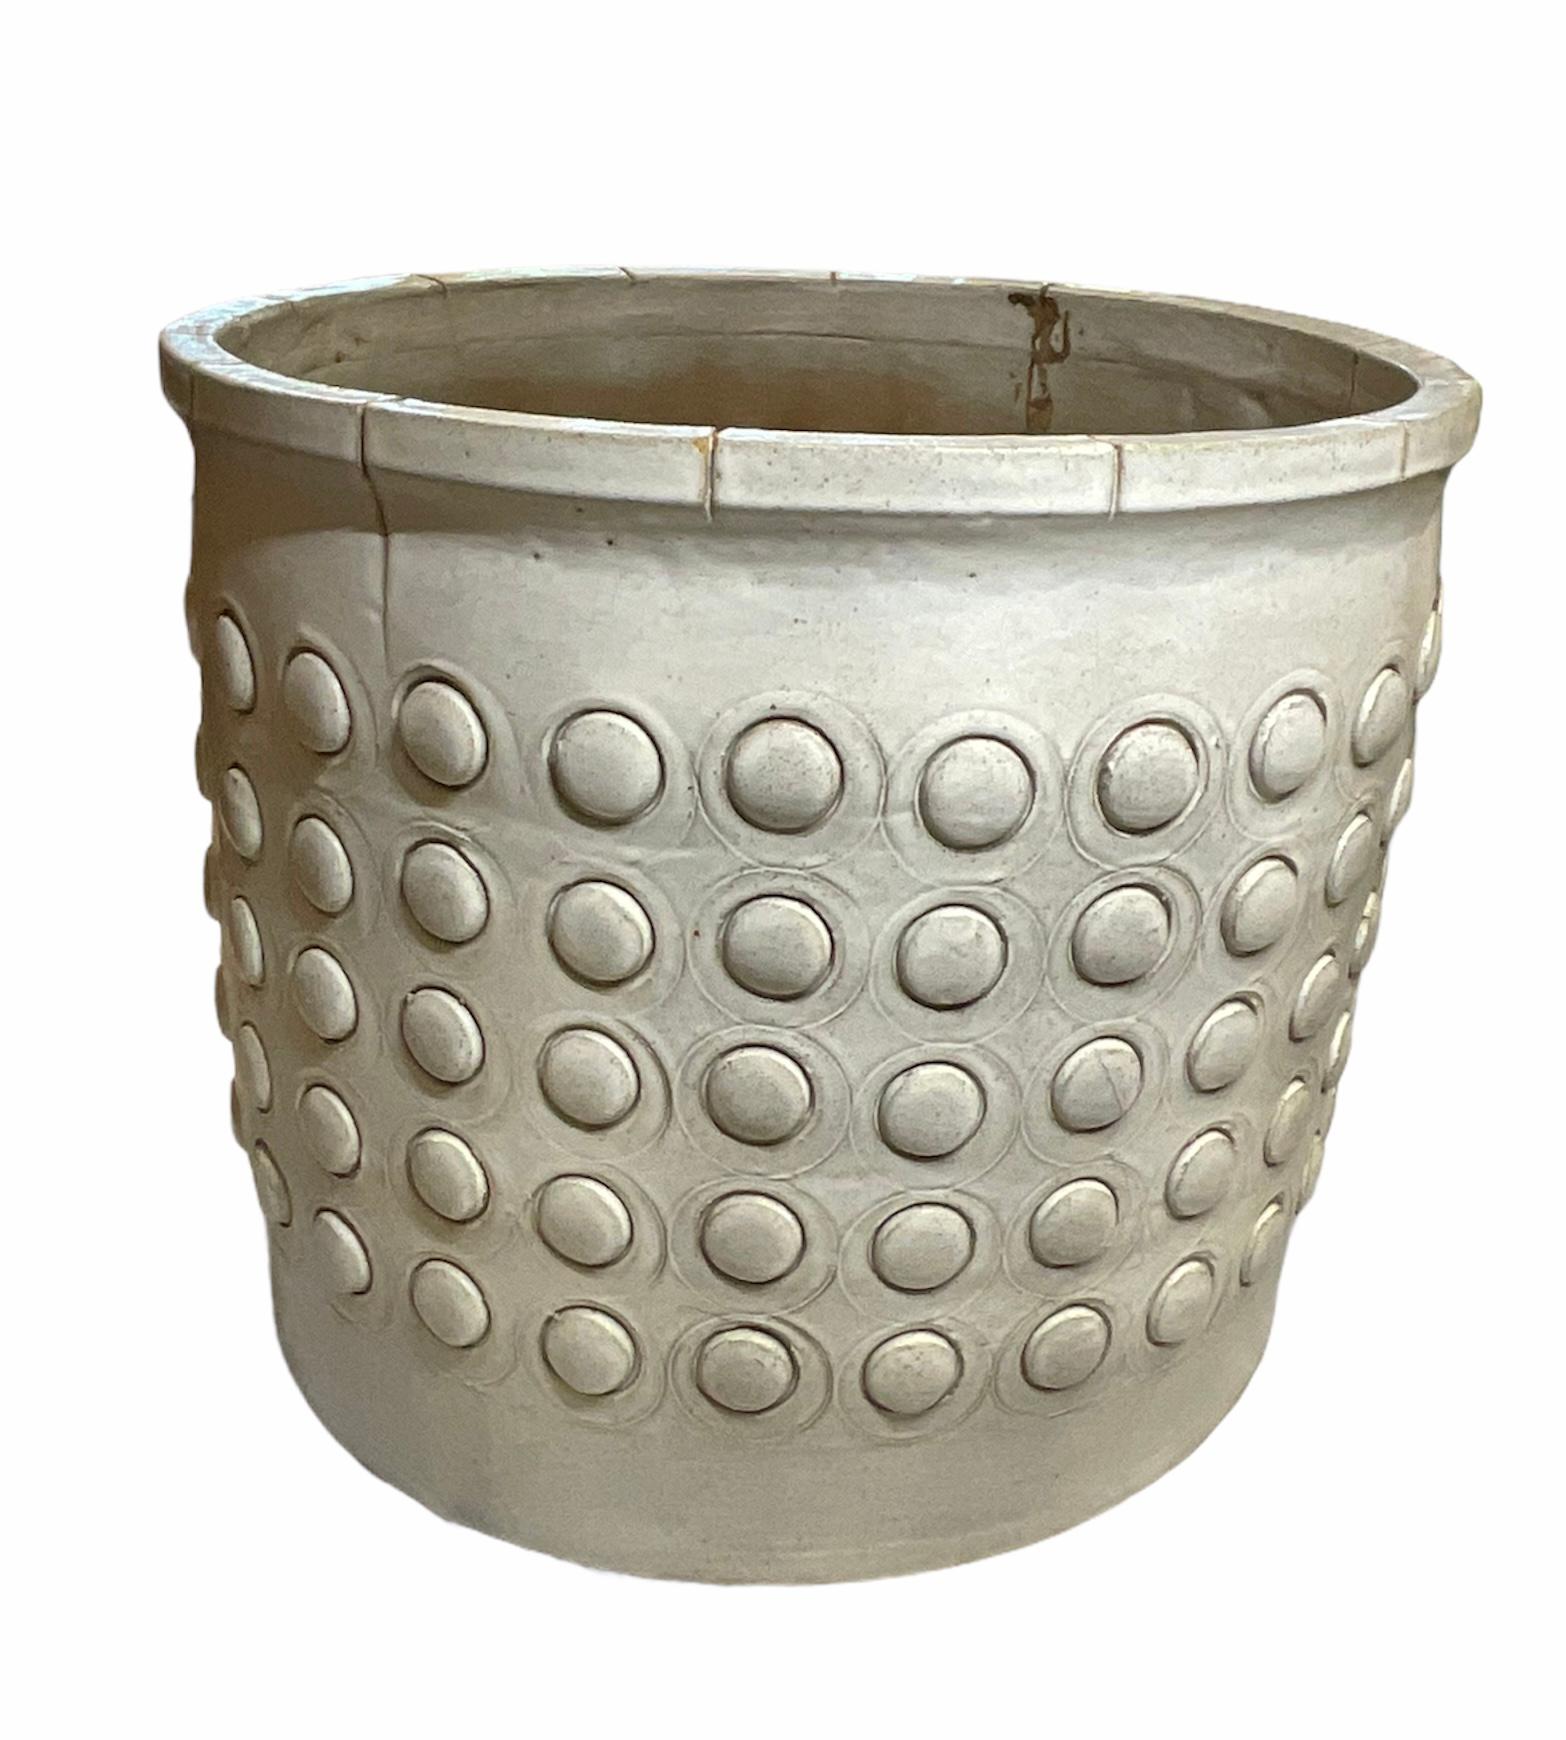 This is a Hal Lasky, Isla Del Sol Puertorican huge heavy round stoneware planter. It is painted like a light pearly color and is adorned with five rows of protruded half moon shaped spheres of the same color all around. This planter weights about